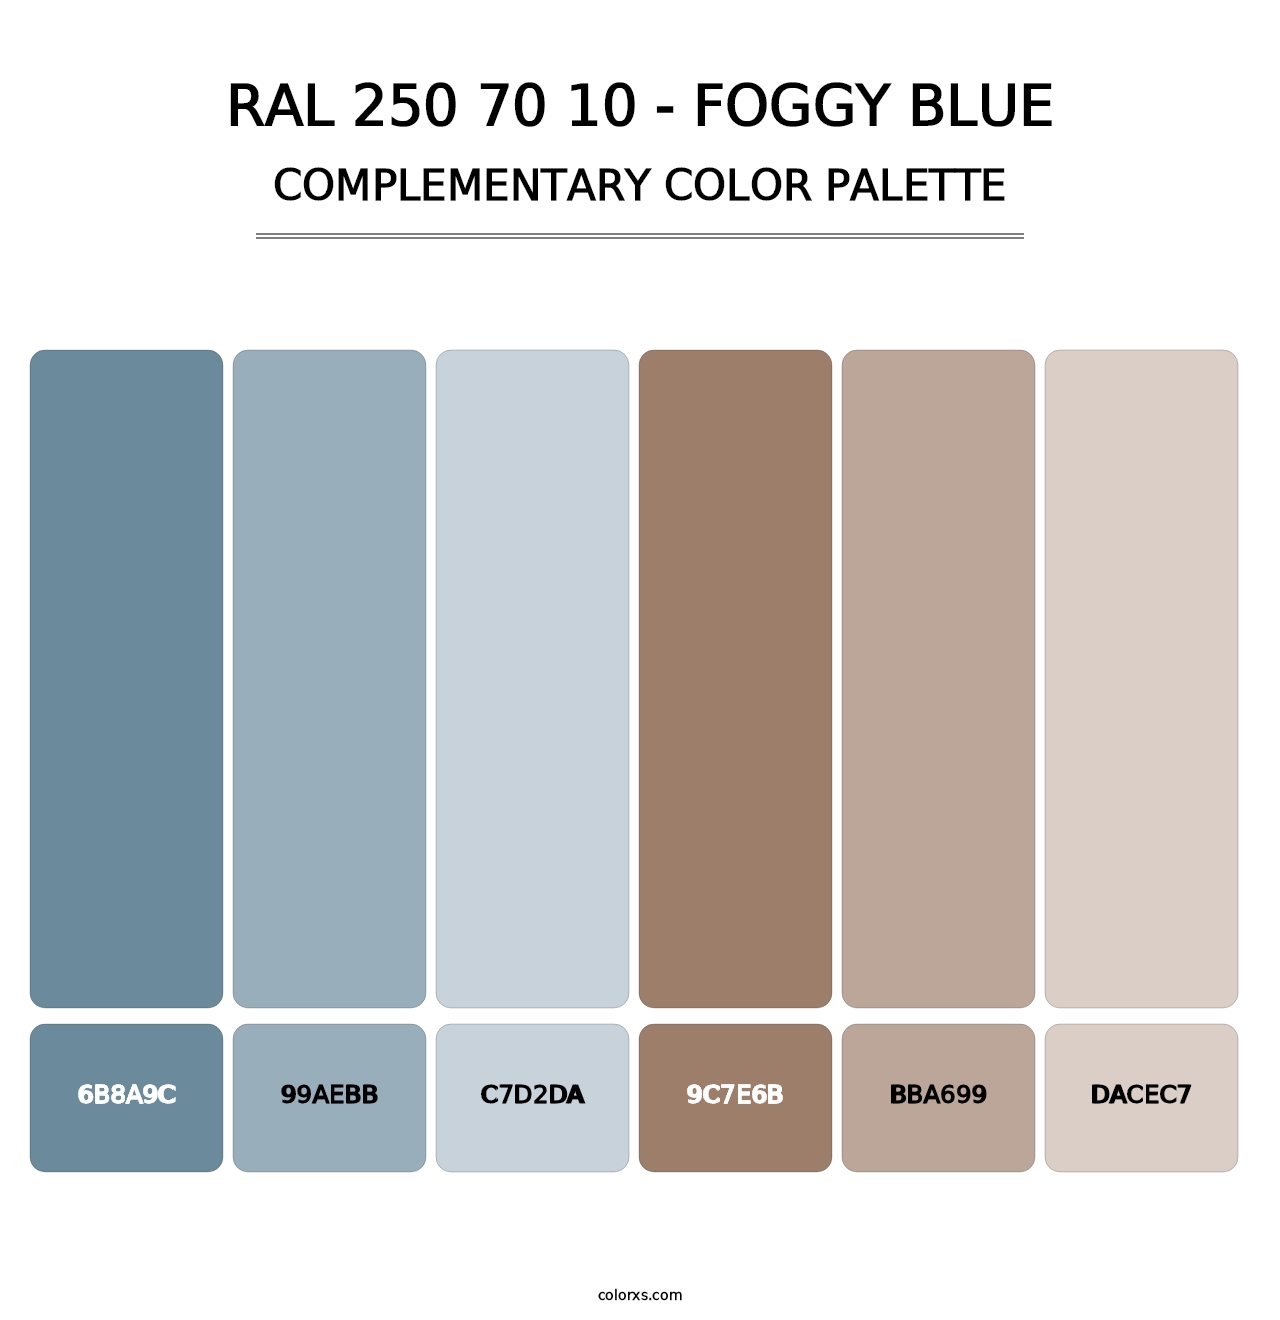 RAL 250 70 10 - Foggy Blue - Complementary Color Palette